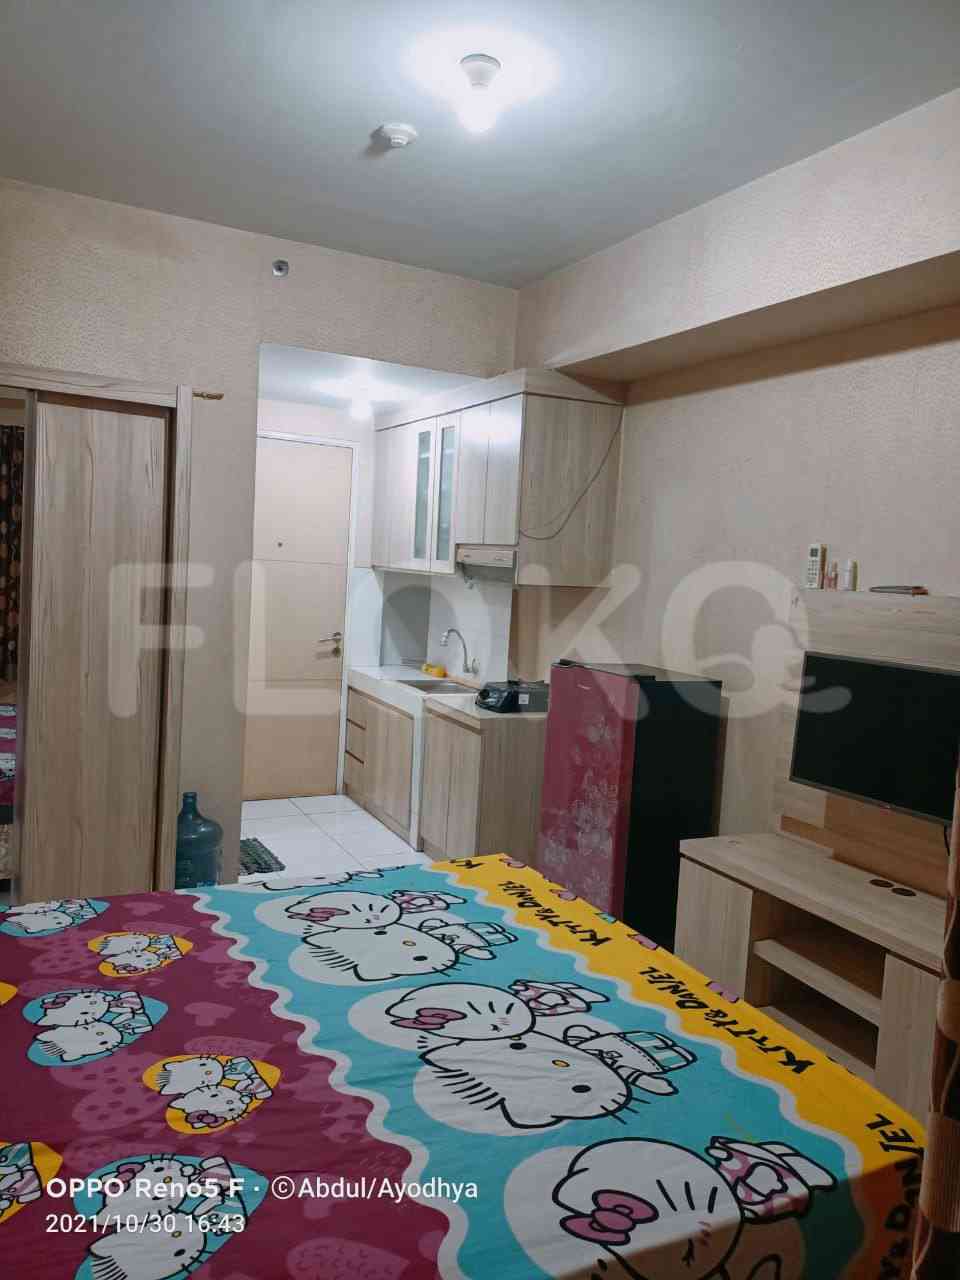 1 Bedroom on 12th Floor for Rent in Kota Ayodhya Apartment - fcid9f 1